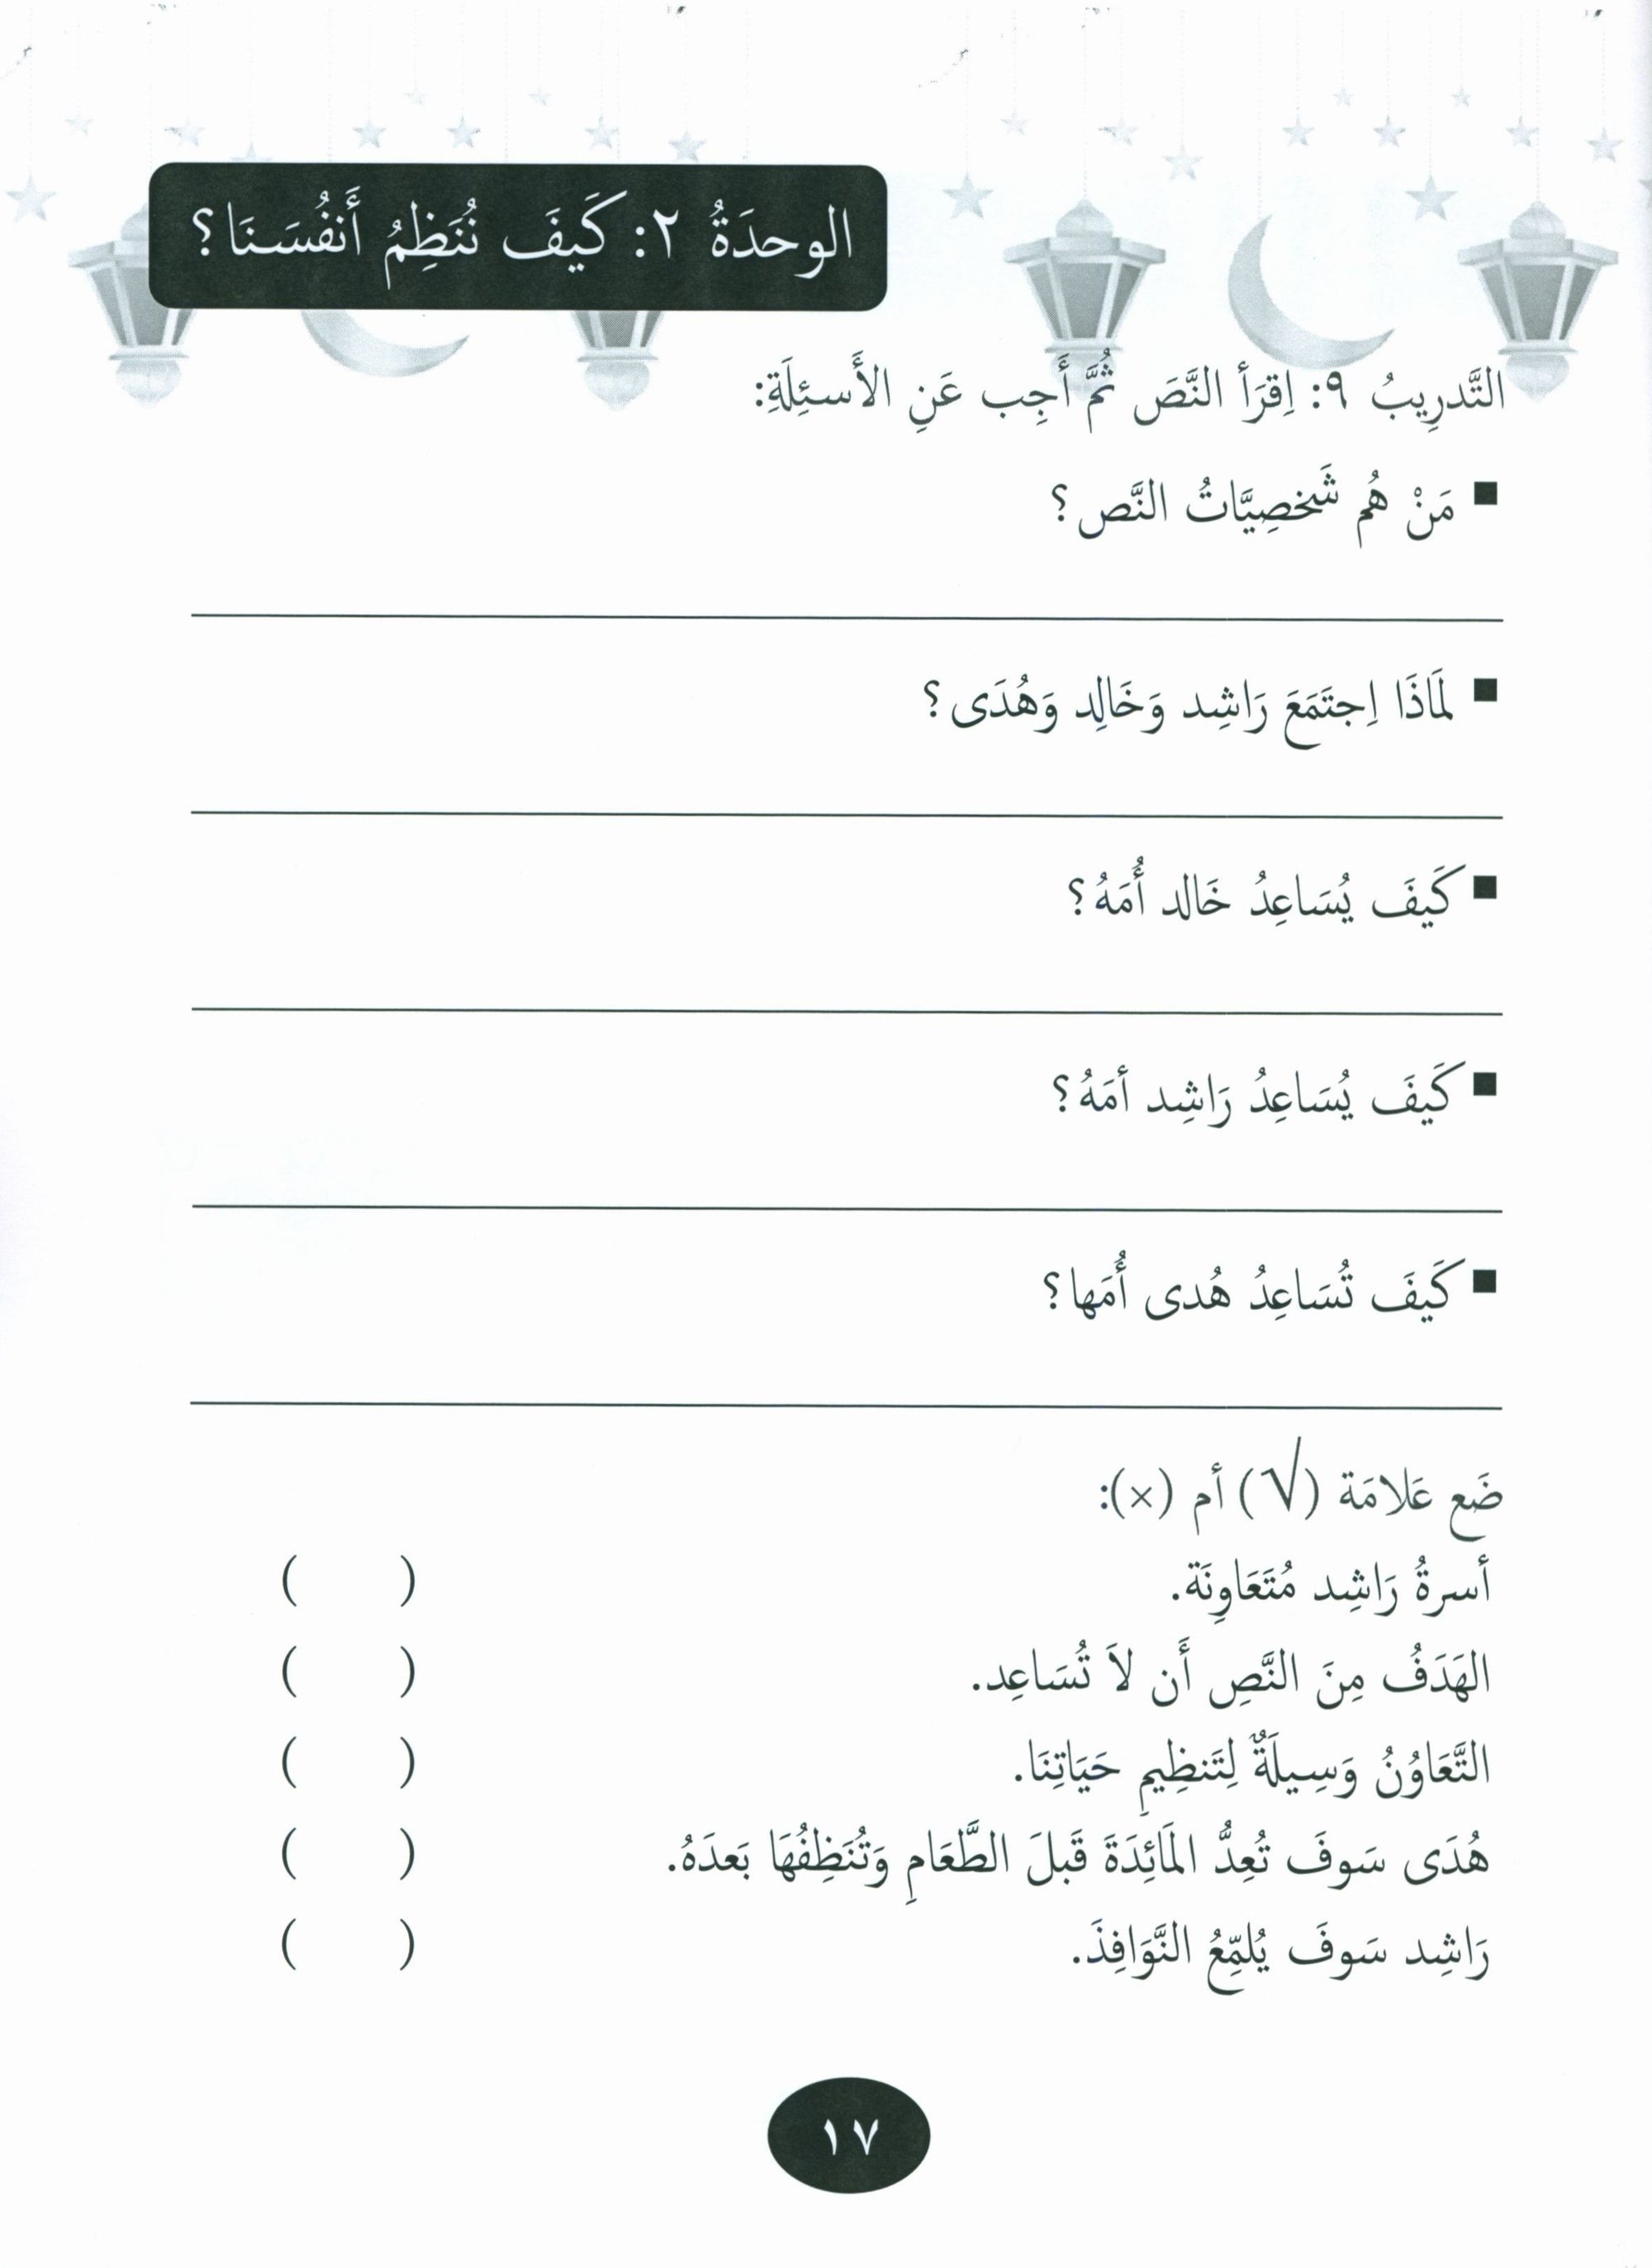 Our Language Is Our Pride Practice Level 3 لغتنا فخرنا